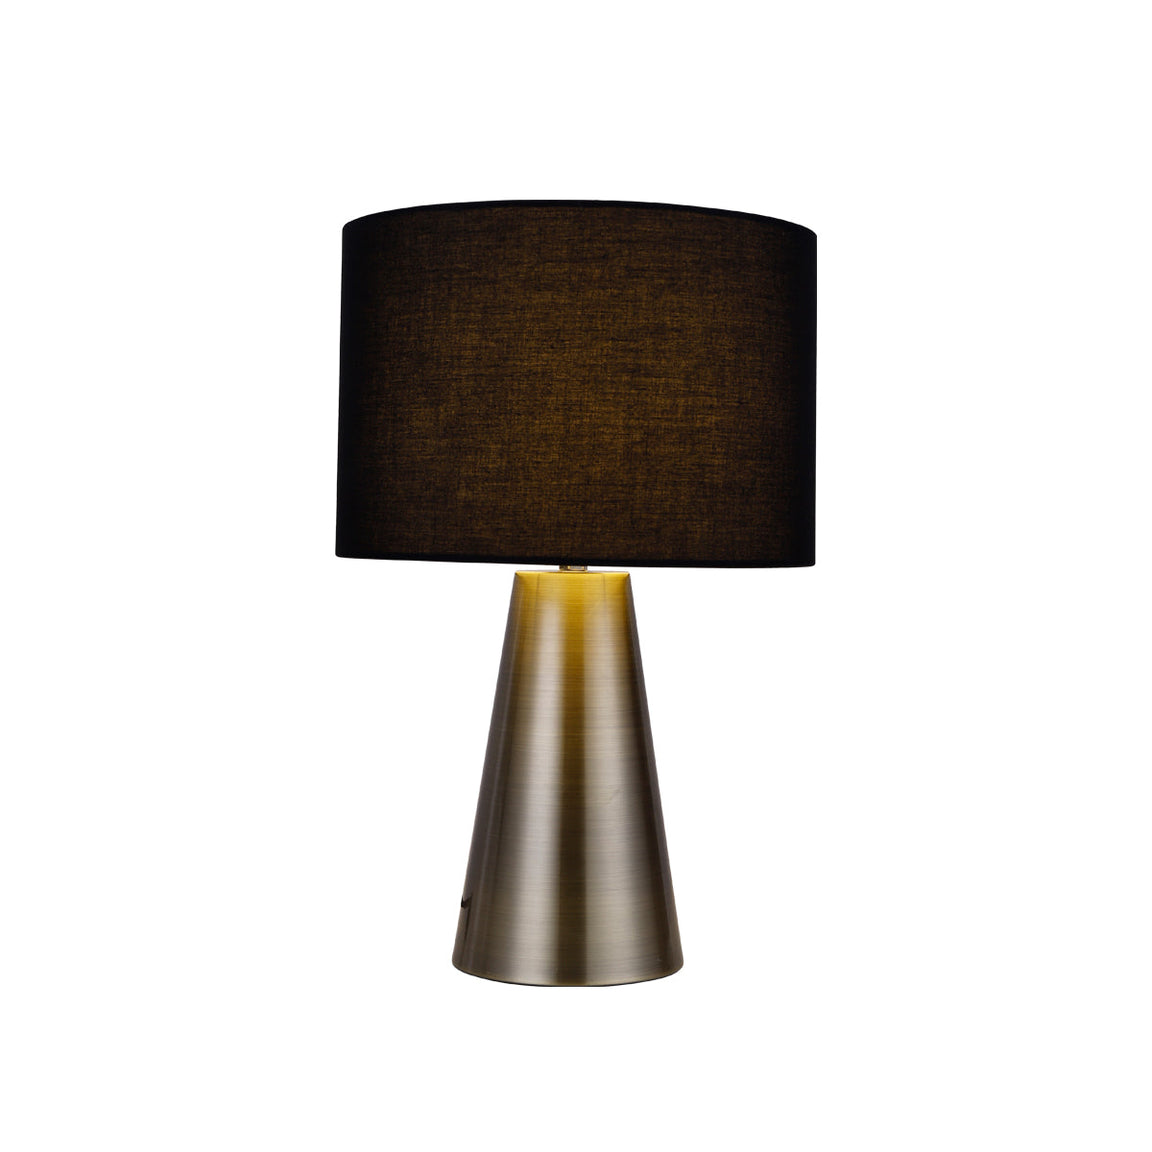 Tayla Black and Antique Brass Contemporary Touch Lamp